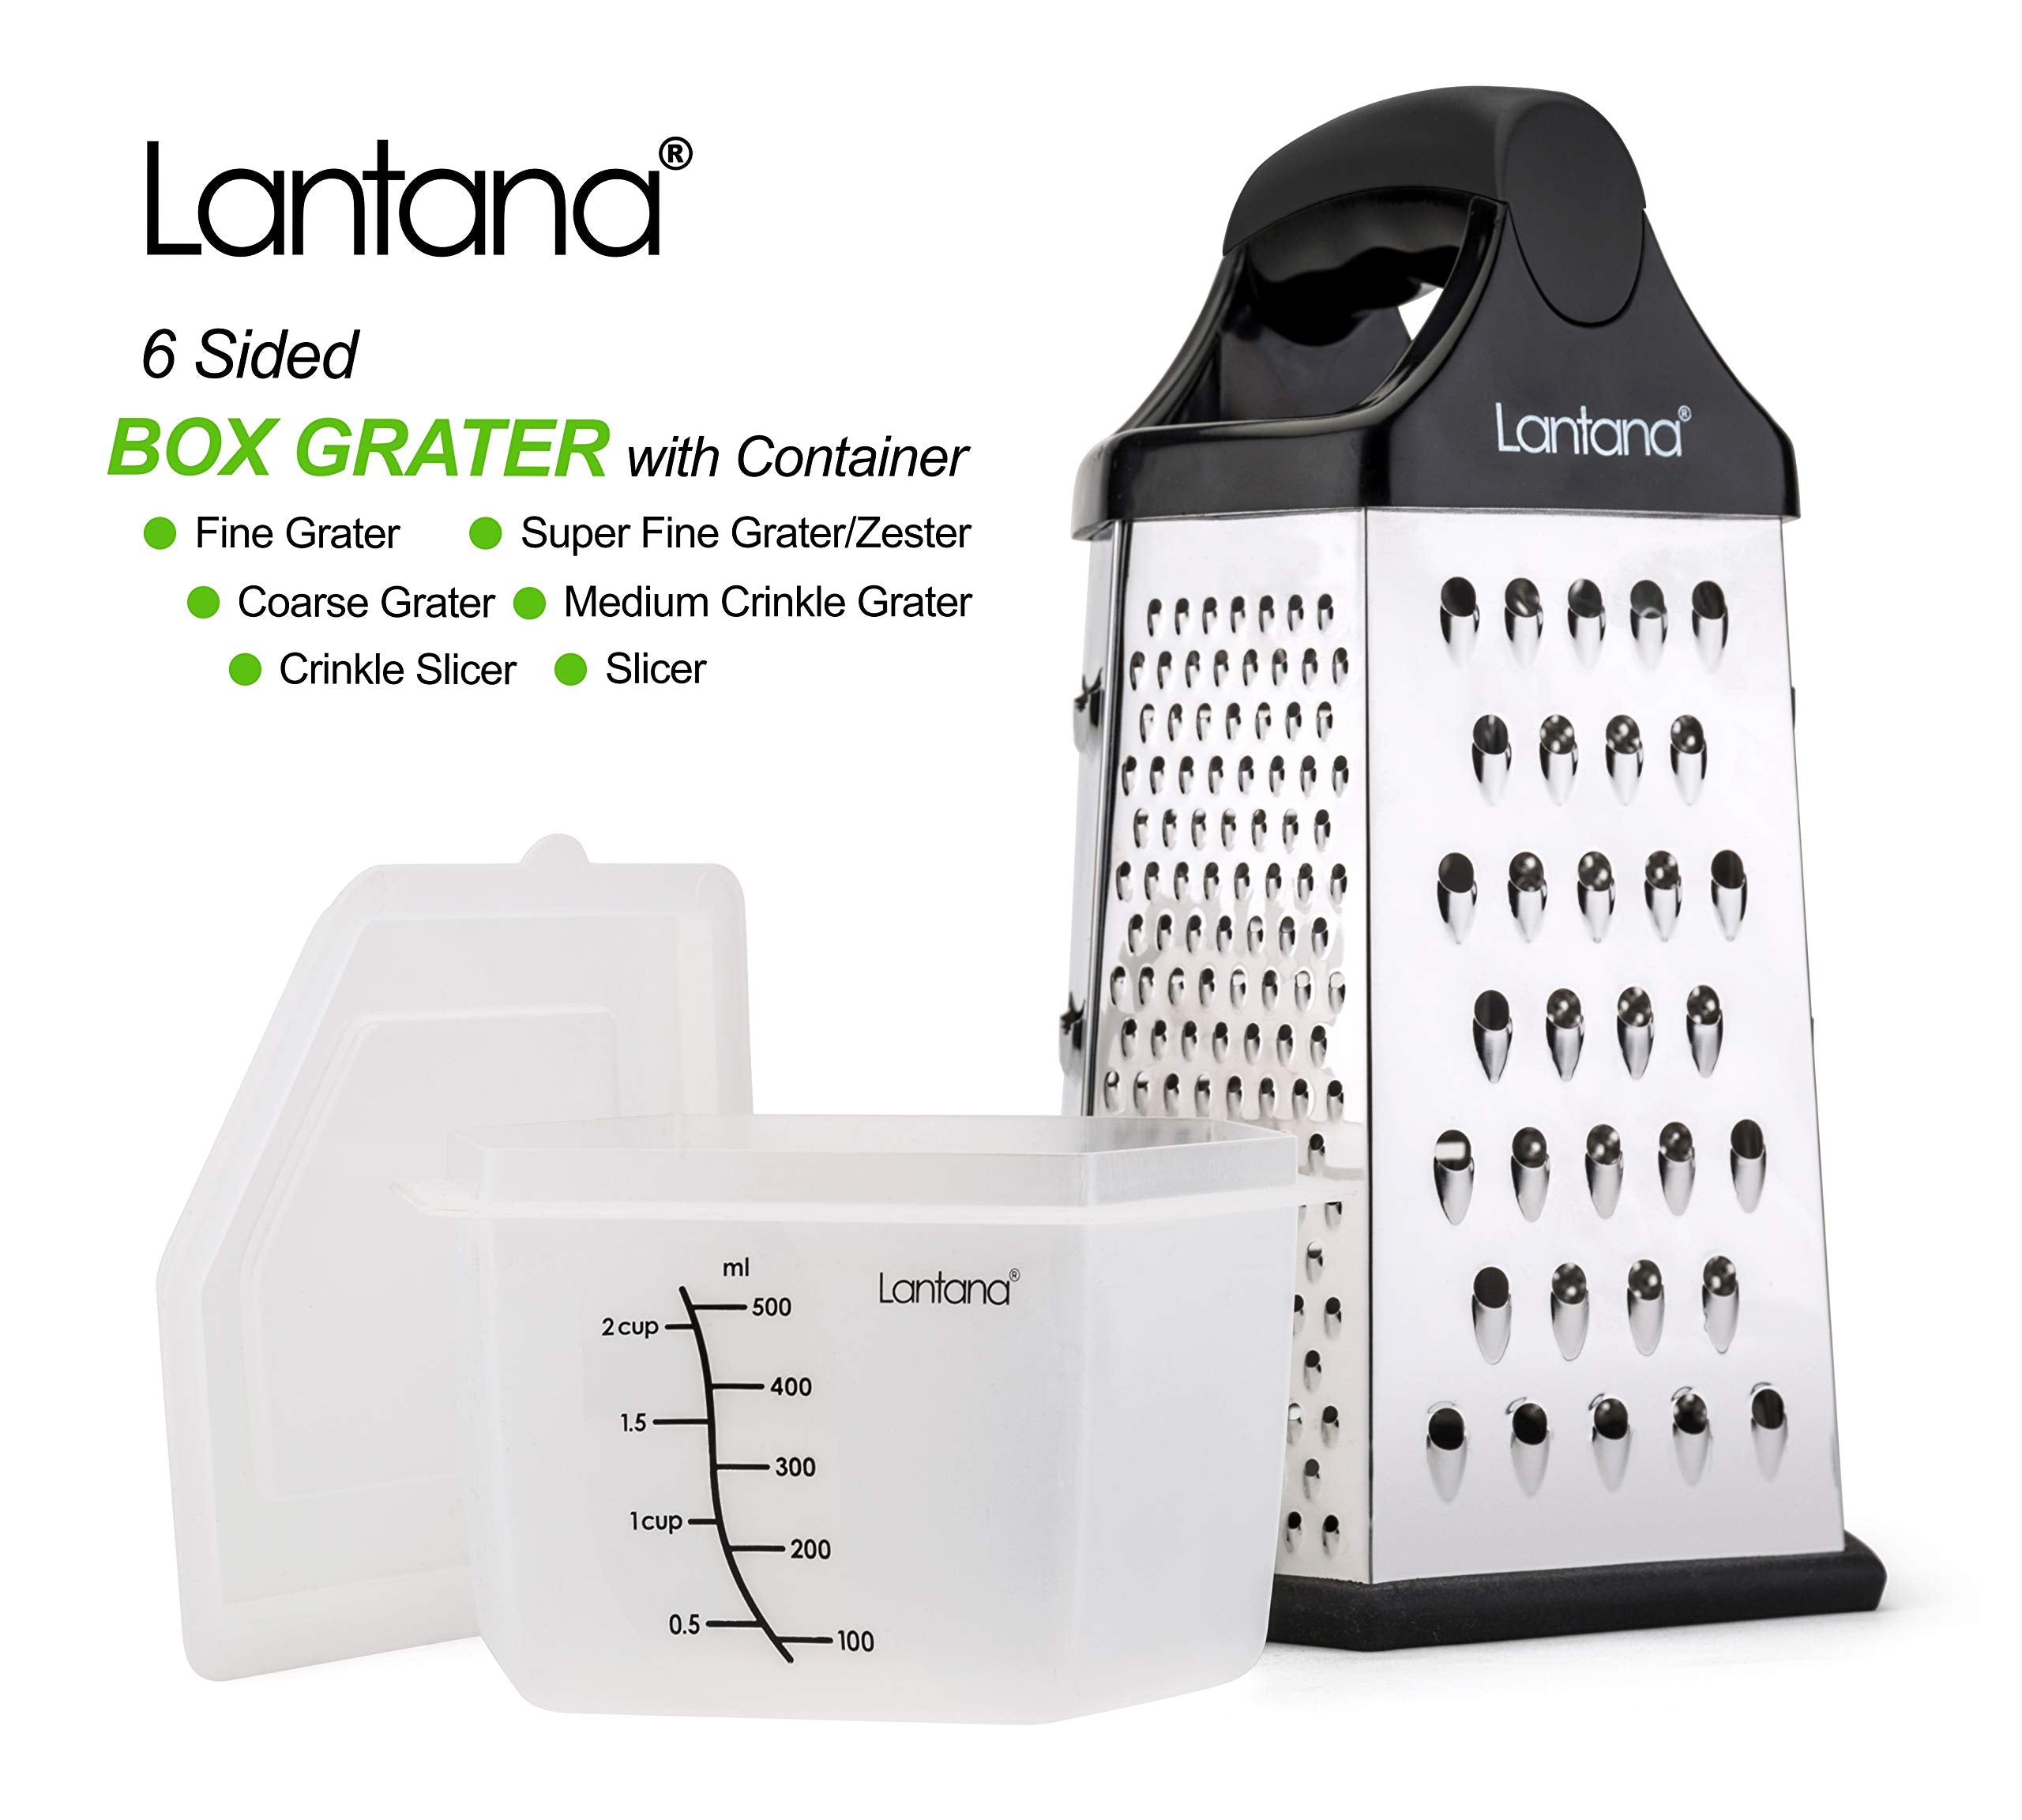 Lantana Cheese Grater with Container & Lid – Hand held Grater/Slicer/Zester with 6 Essential Kitchen functions for Coarse, Medium, Fine, Micro-Grating/Zesting/Slicing - Black/Polished Stainless Steel